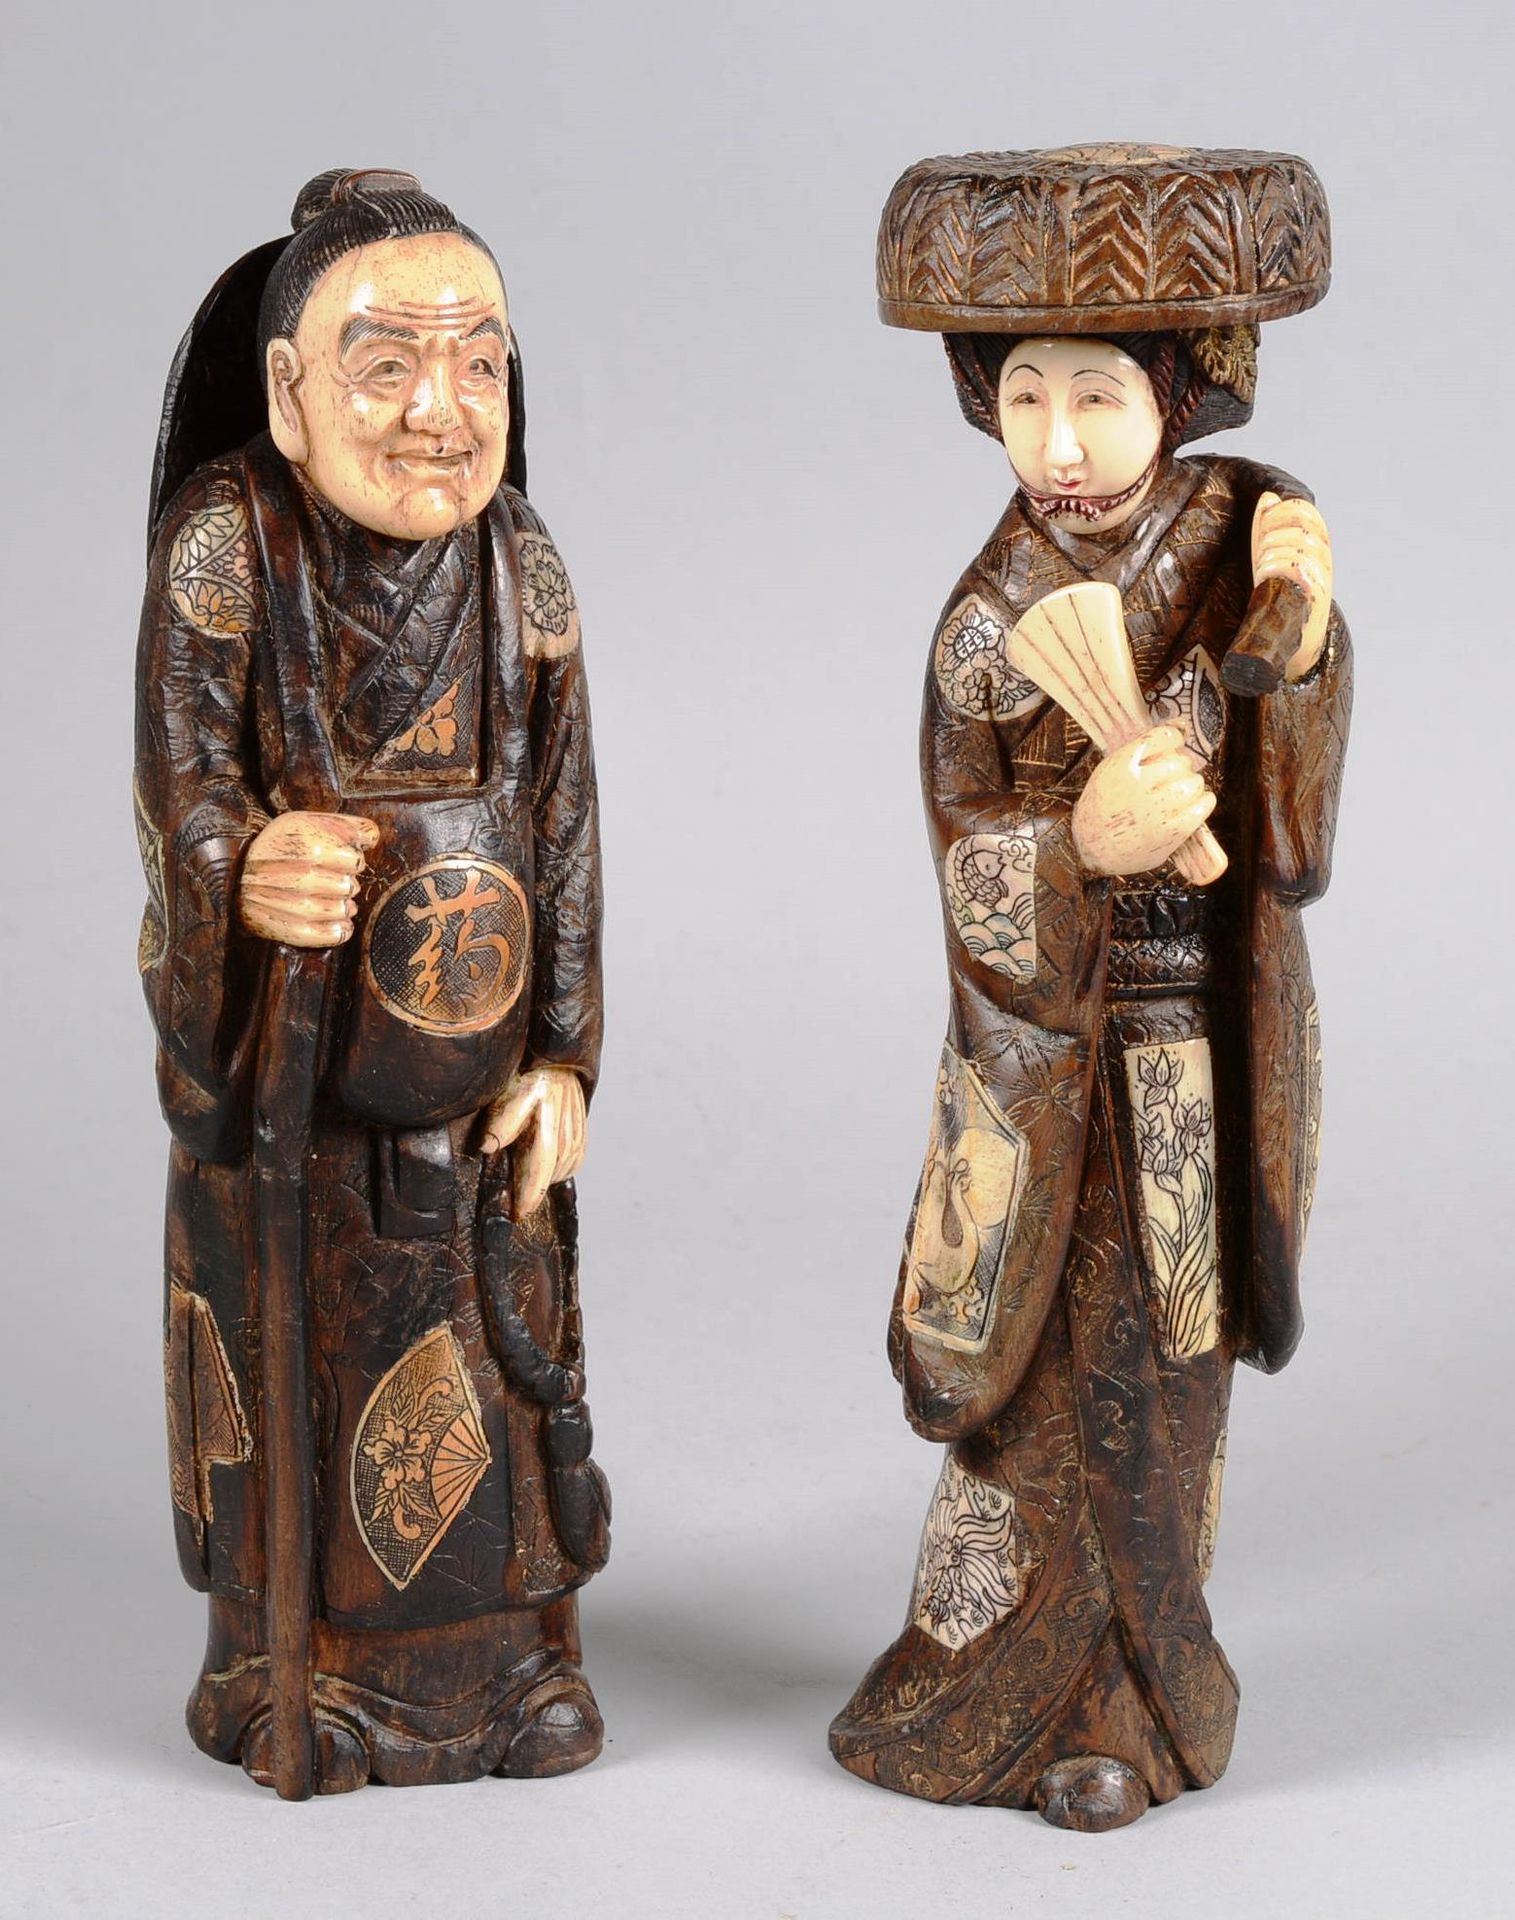 JAPON. JAPAN.

Two carved wooden figures called chryselephantines, the faces, ha&hellip;